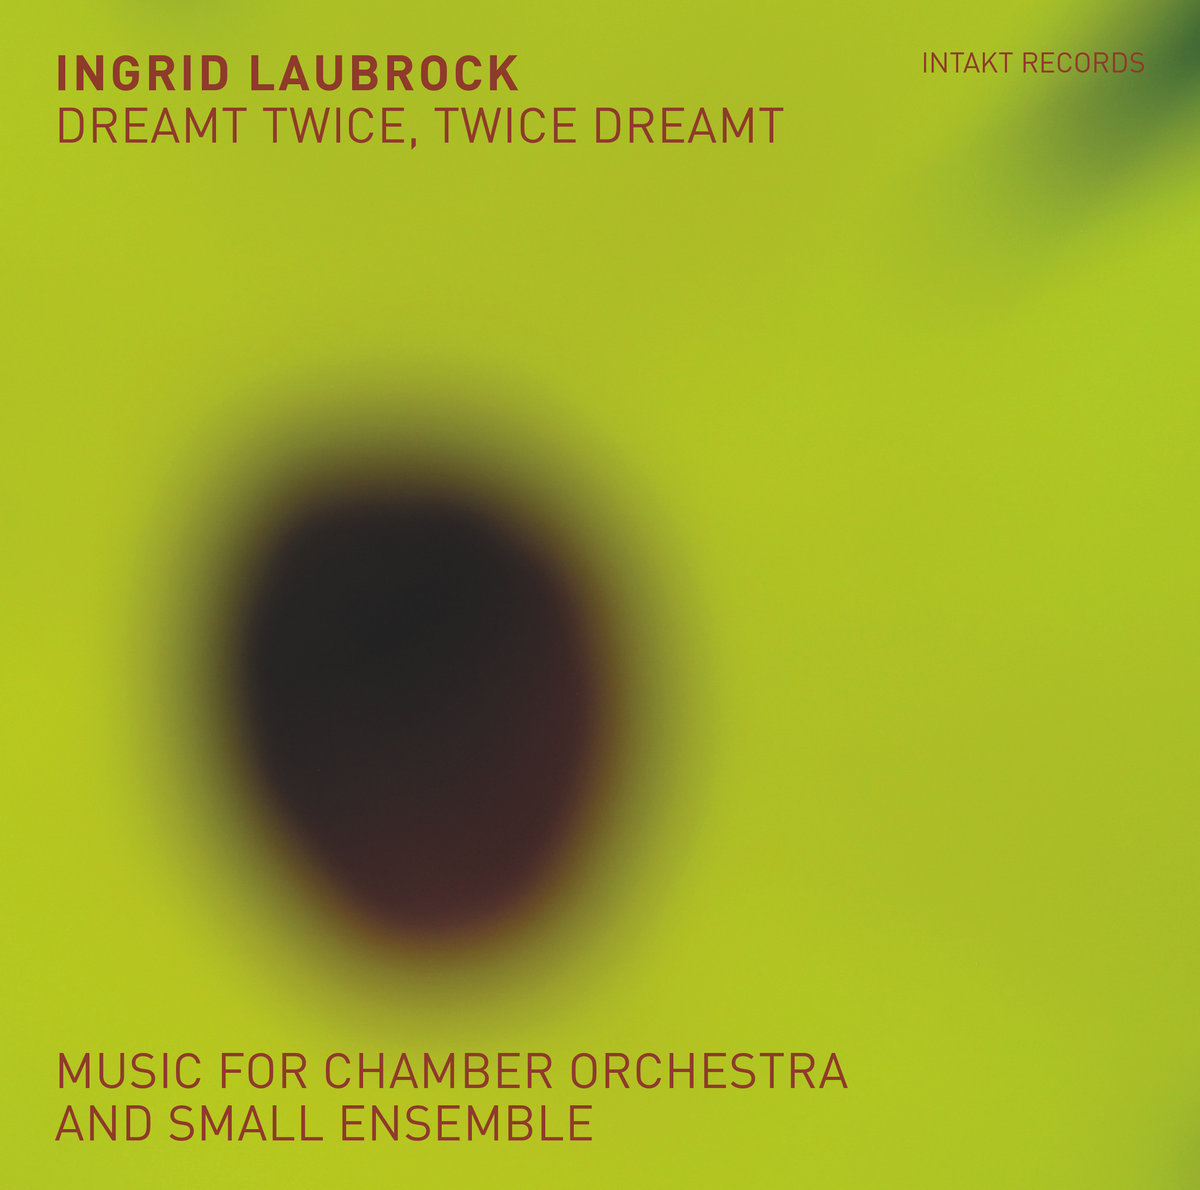 Ingrid Laubrock – Dreamt Twice, Twice Dreamt: Music for Chamber Orchestra & Small Ensemble (2020) [FLAC 24bit/96kHz]